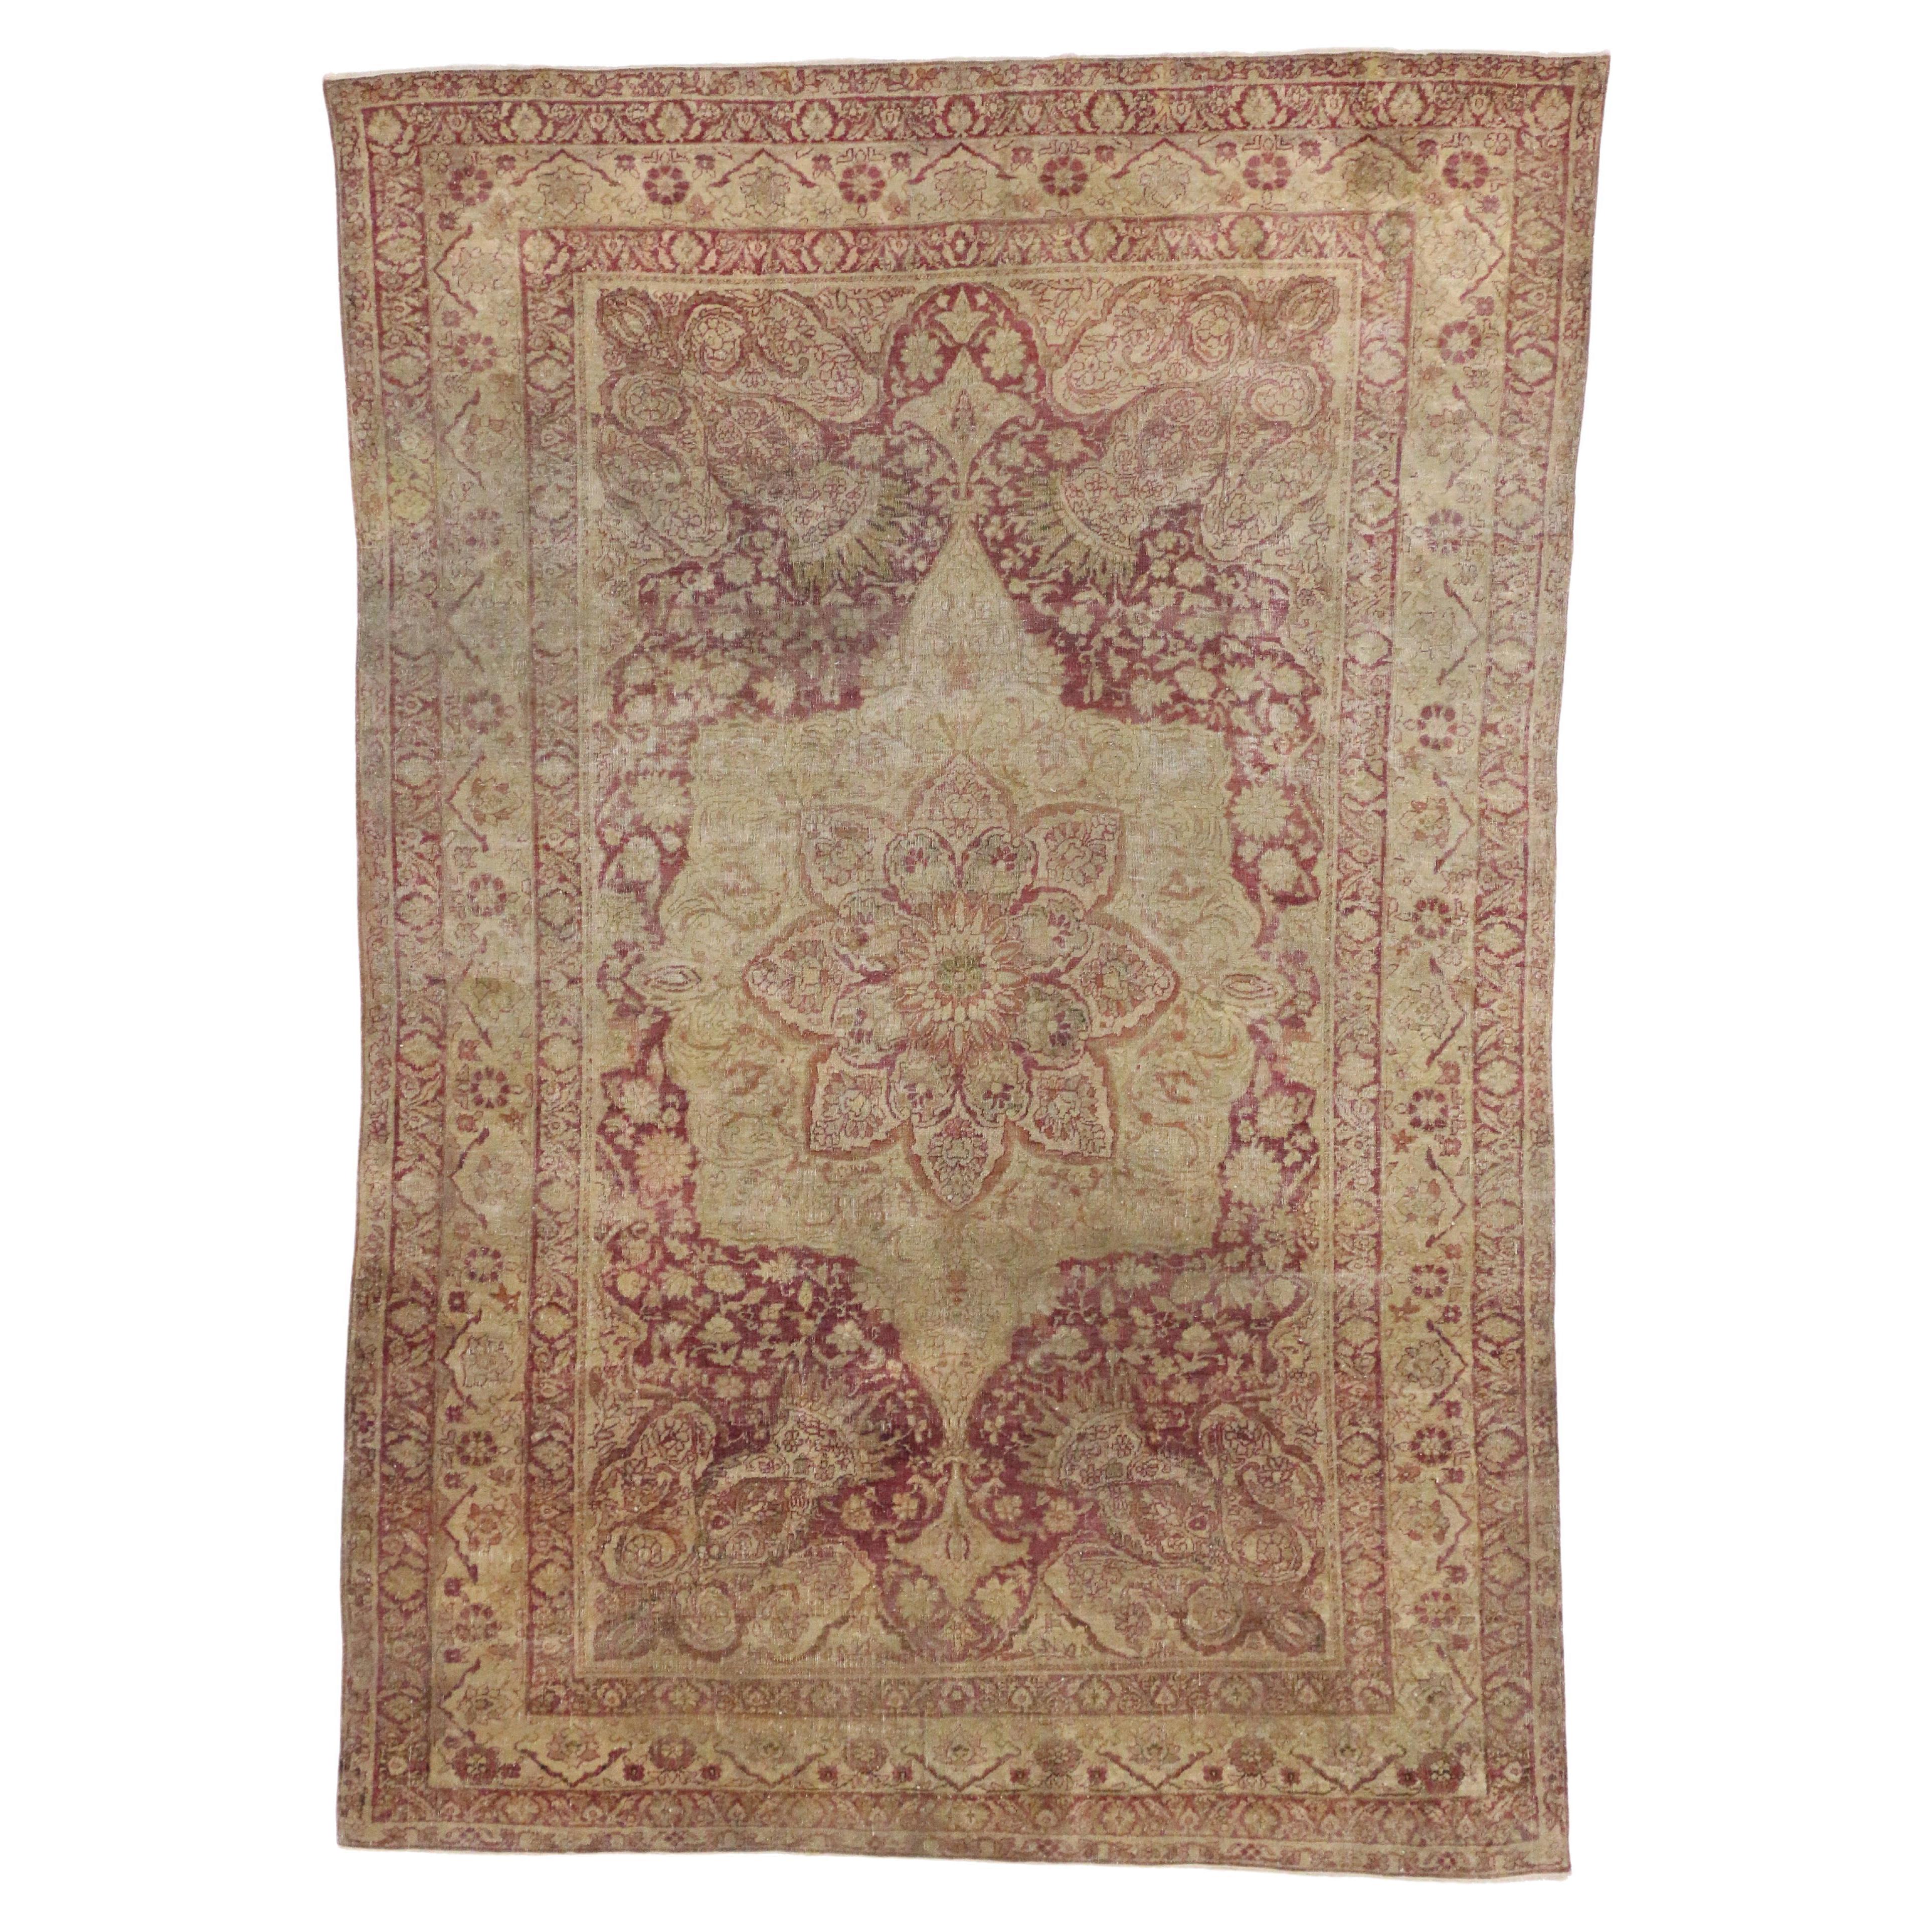 Antique Turkish Hereke Rug with Art Nouveau Style in Muted Colors